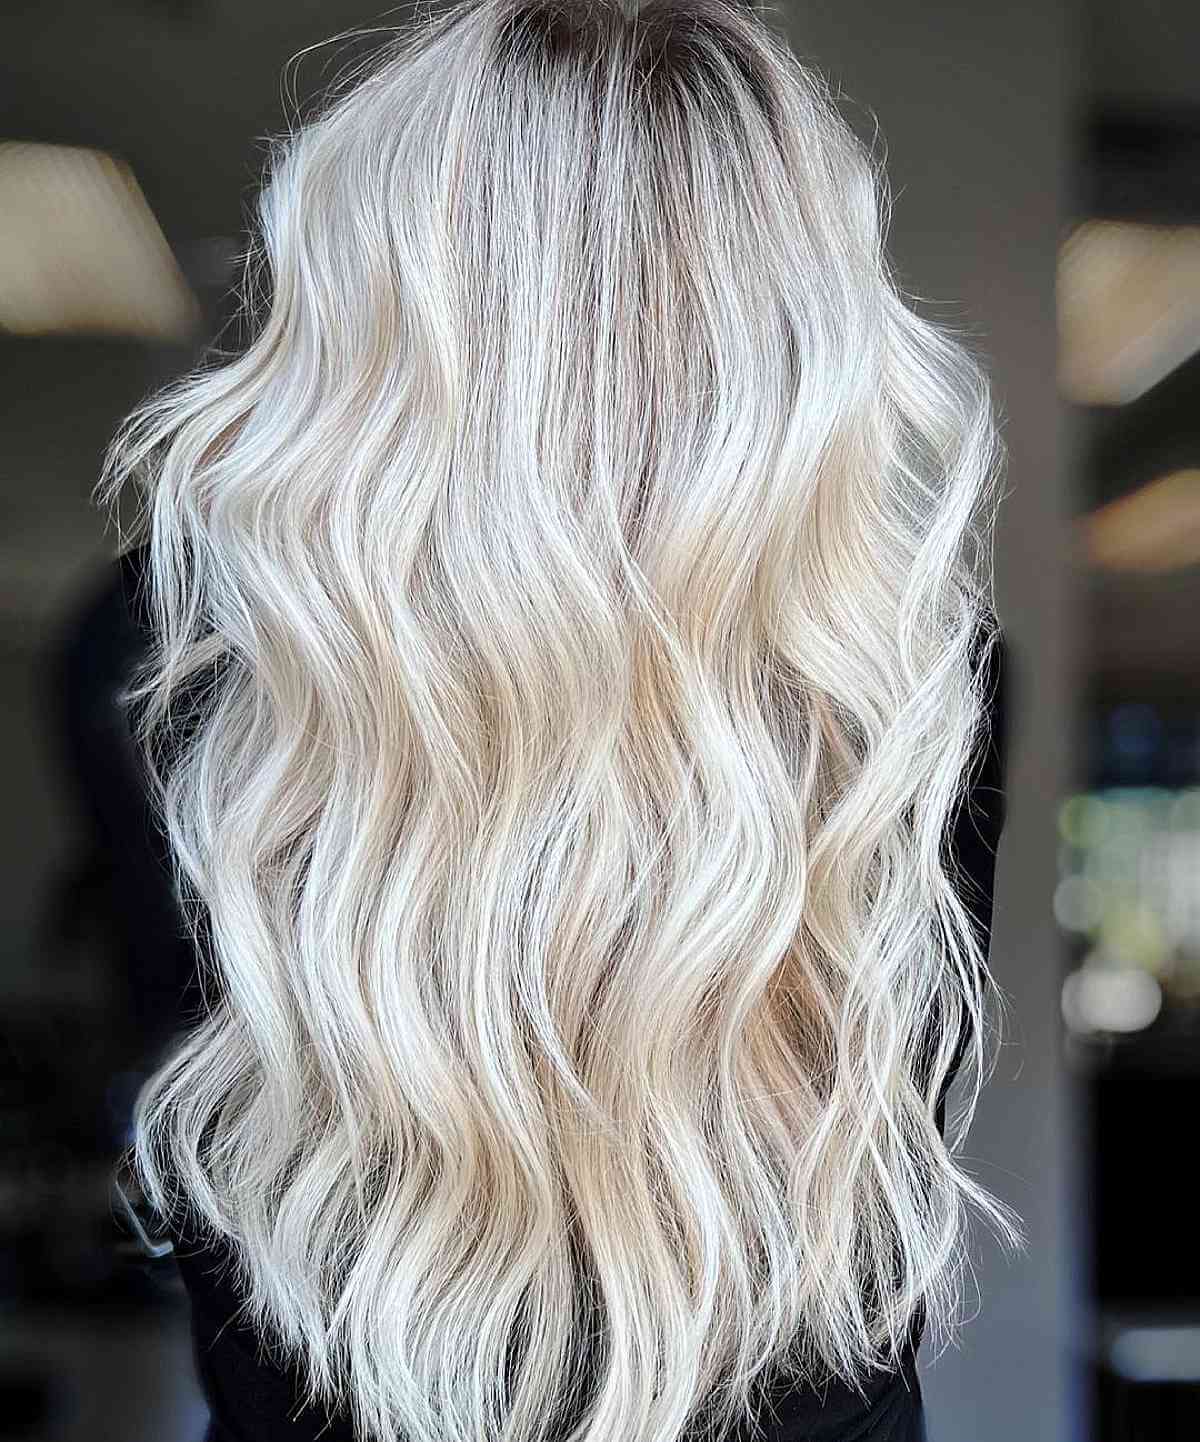 25 Stunning Blonde Hair Color Ideas Beautiful For Every Skin Tone - 201